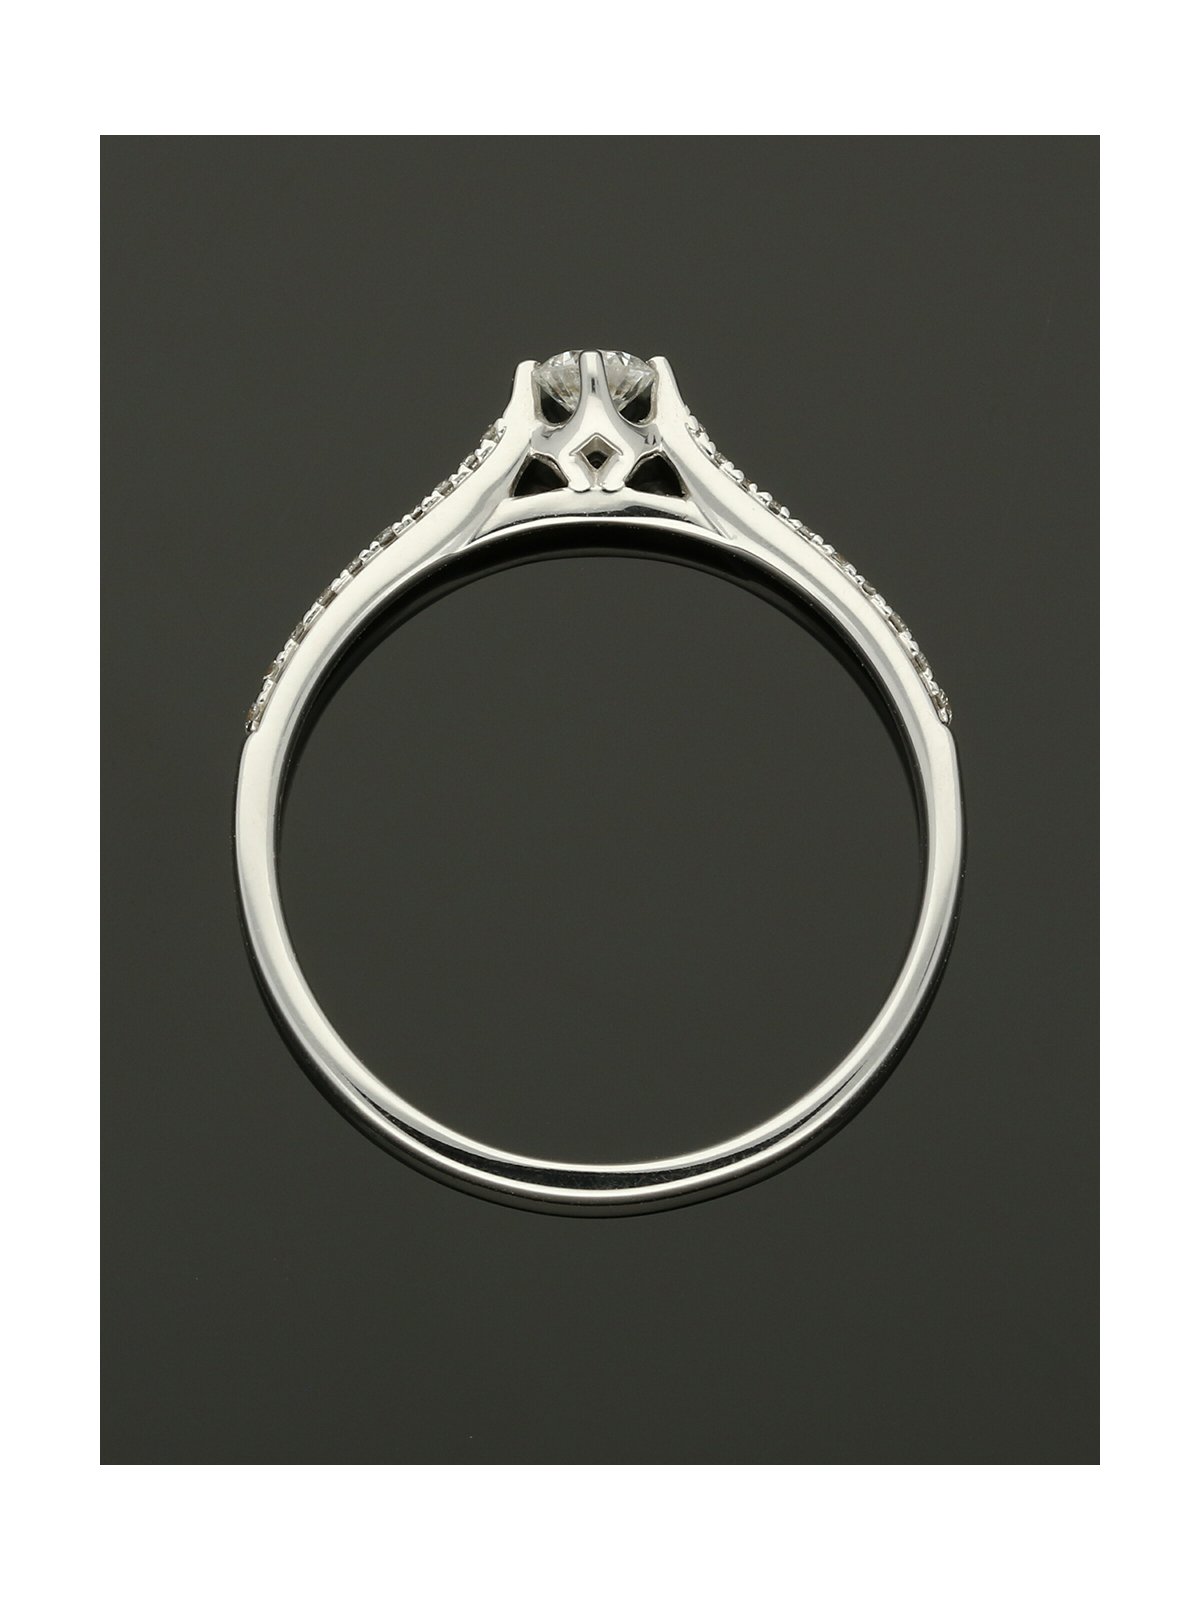  Diamond Solitaire Ring 0.15ct Round Brilliant Cut in 18ct White Gold with Diamond Shoulders